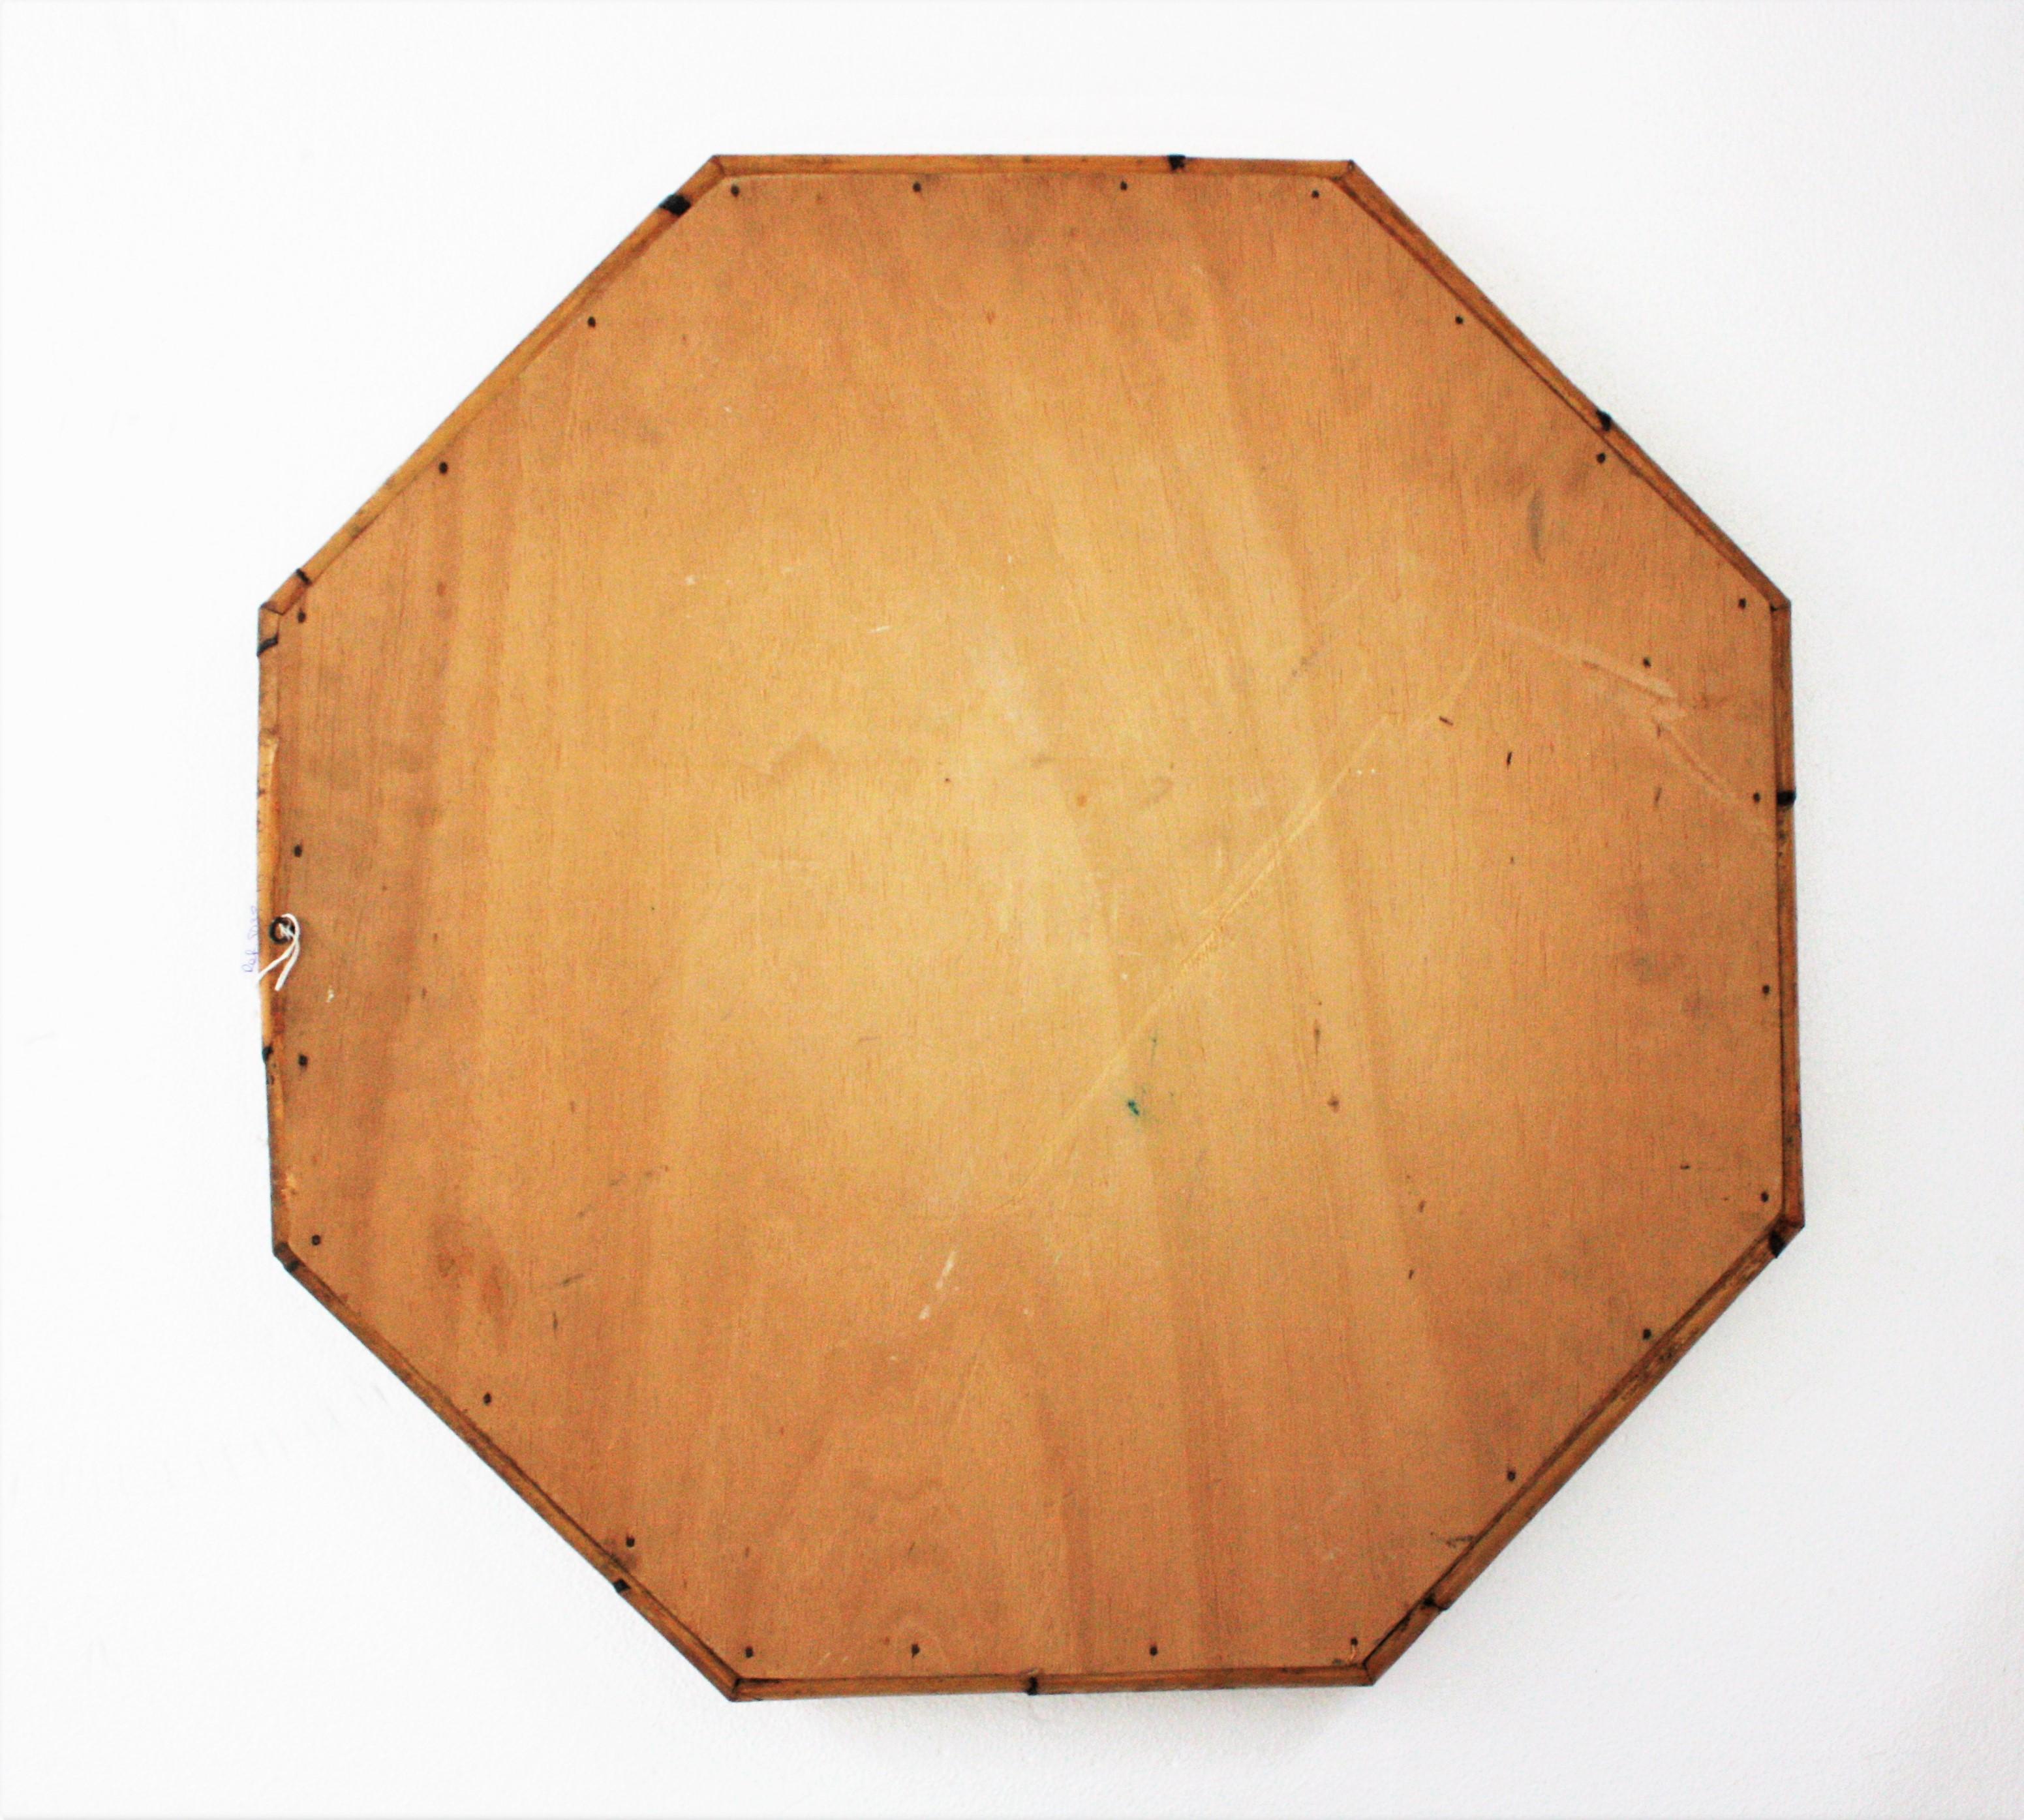 Wicker Octagonal Wall Mirror in Bamboo and Woven Rattan, 1970s For Sale